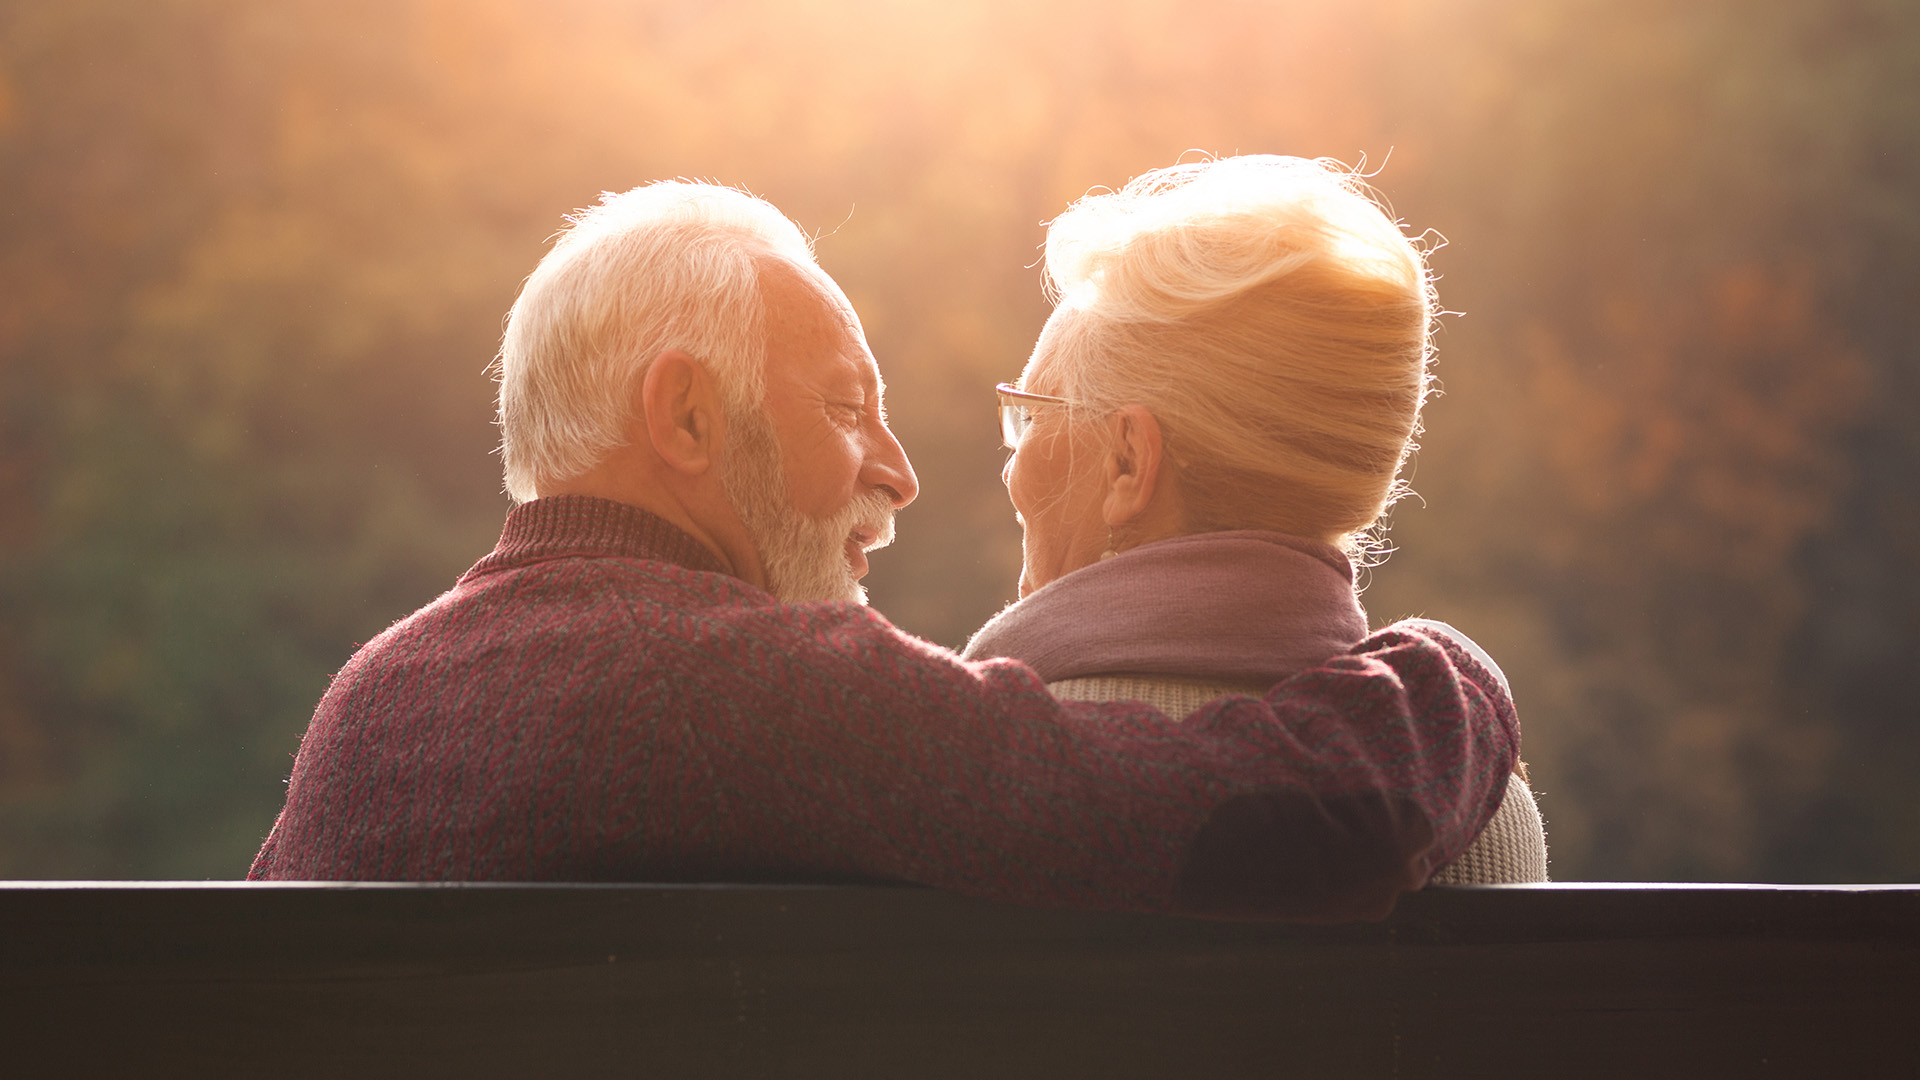 Senior couple sitting outside on bench with man's arm around woman in evening sun